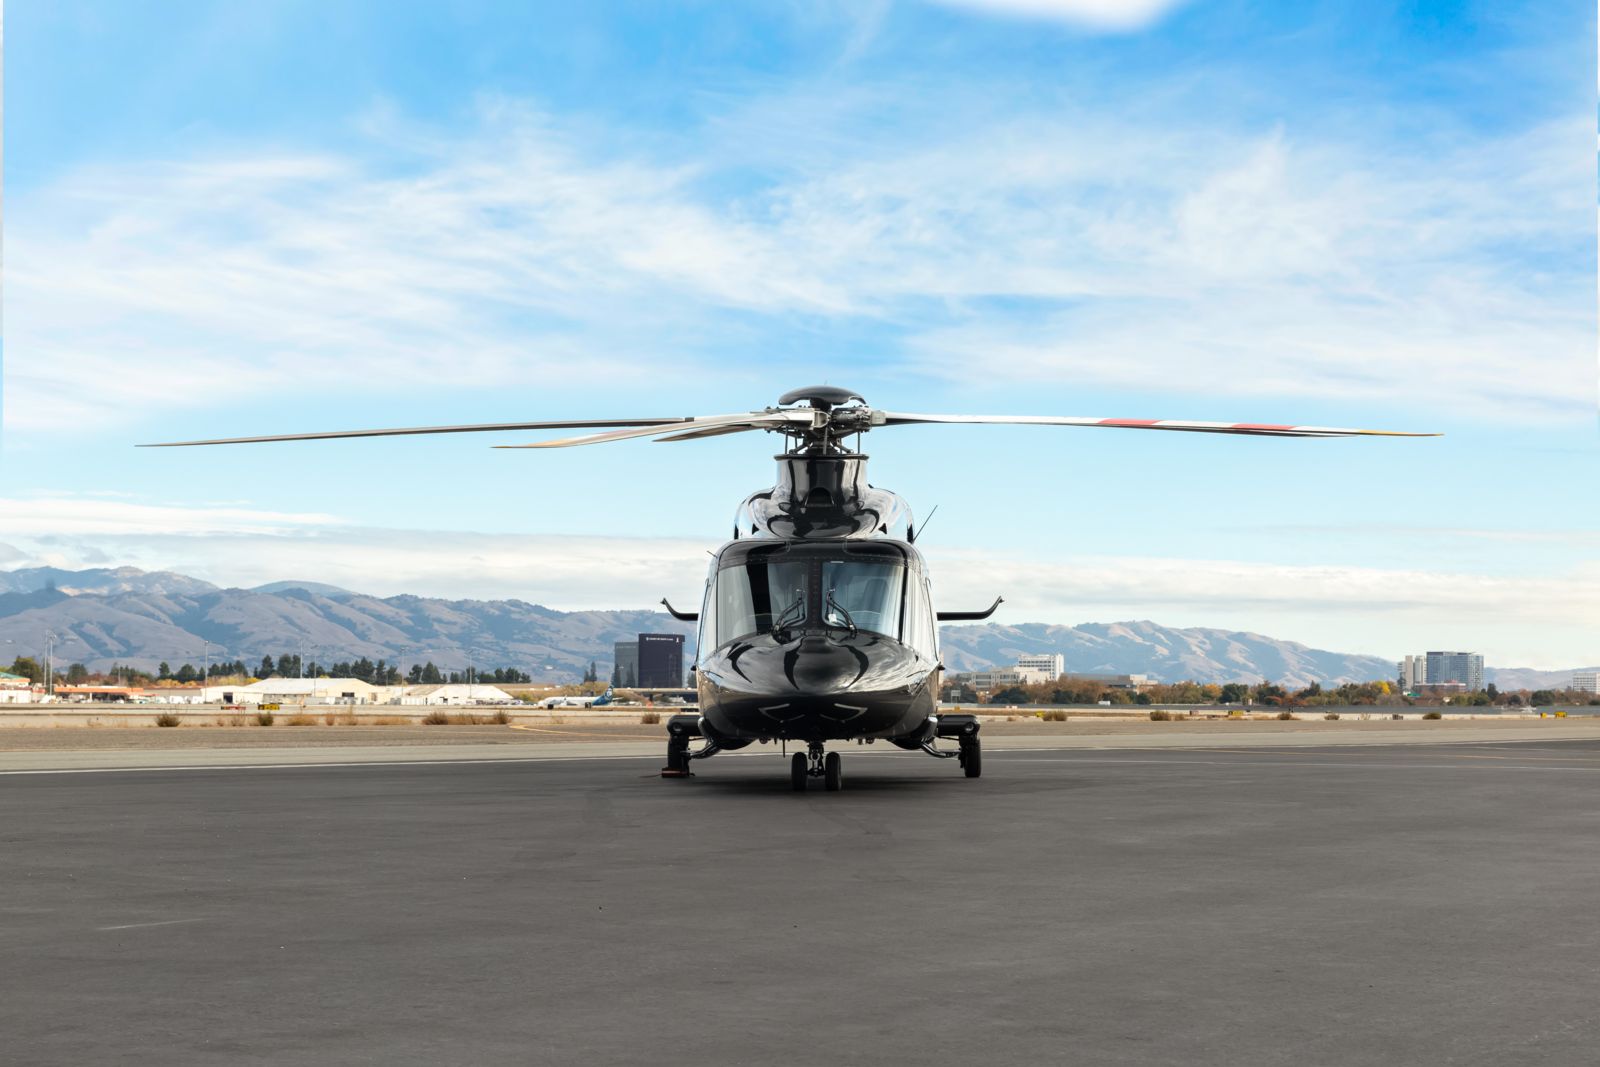 Agusta AW139  S/N 41531 for sale | gallery image: /userfiles/files/bfp_8602.jpg